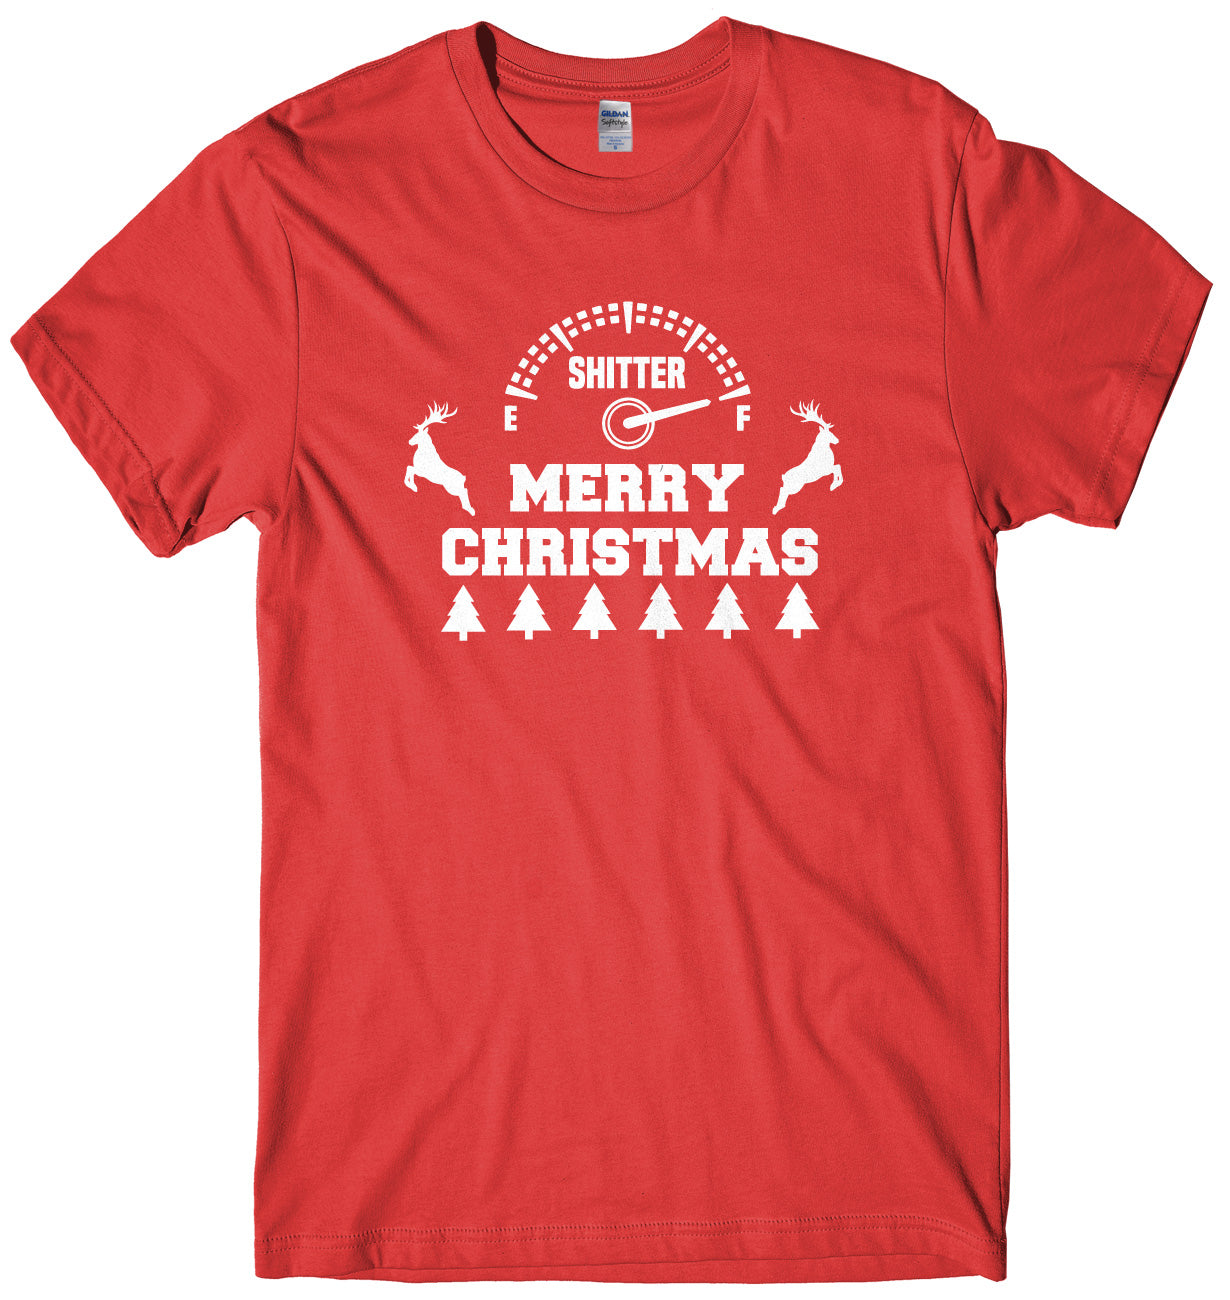 Merry Christmas shitters Full Inspired By Christmas Vacation Mens T-shirt